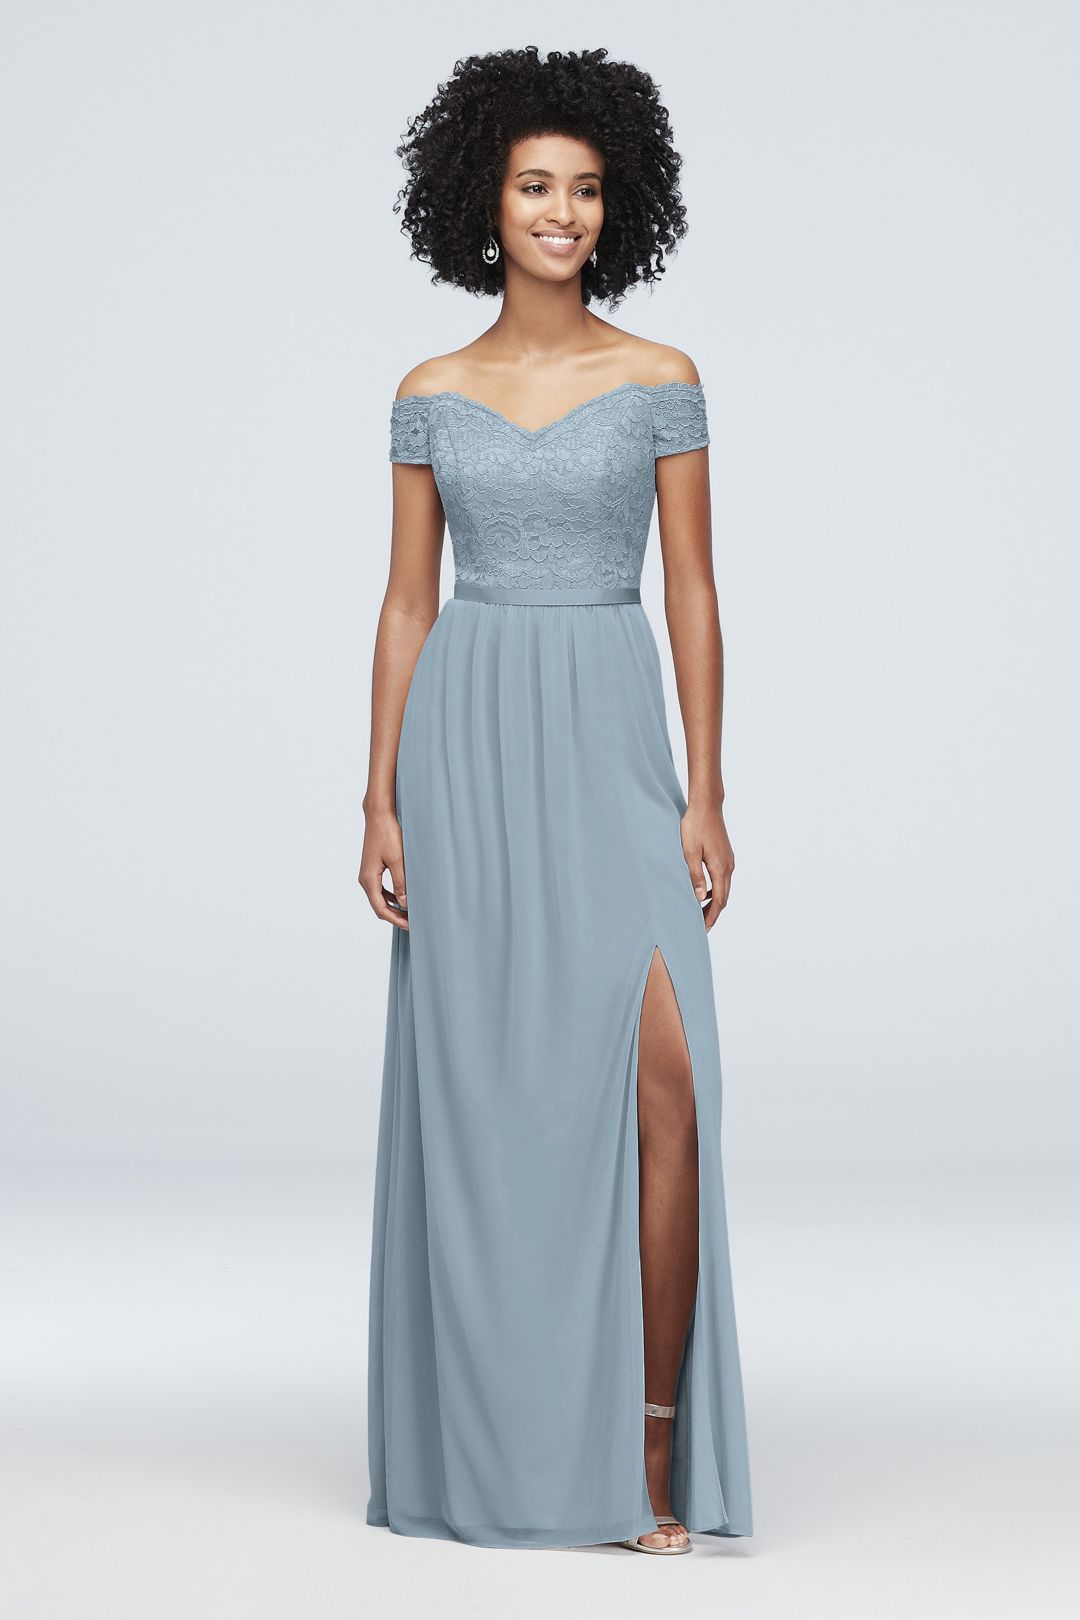 Off-the-Shoulder Lace and Mesh Dusty Blue Bridesmaid Dress